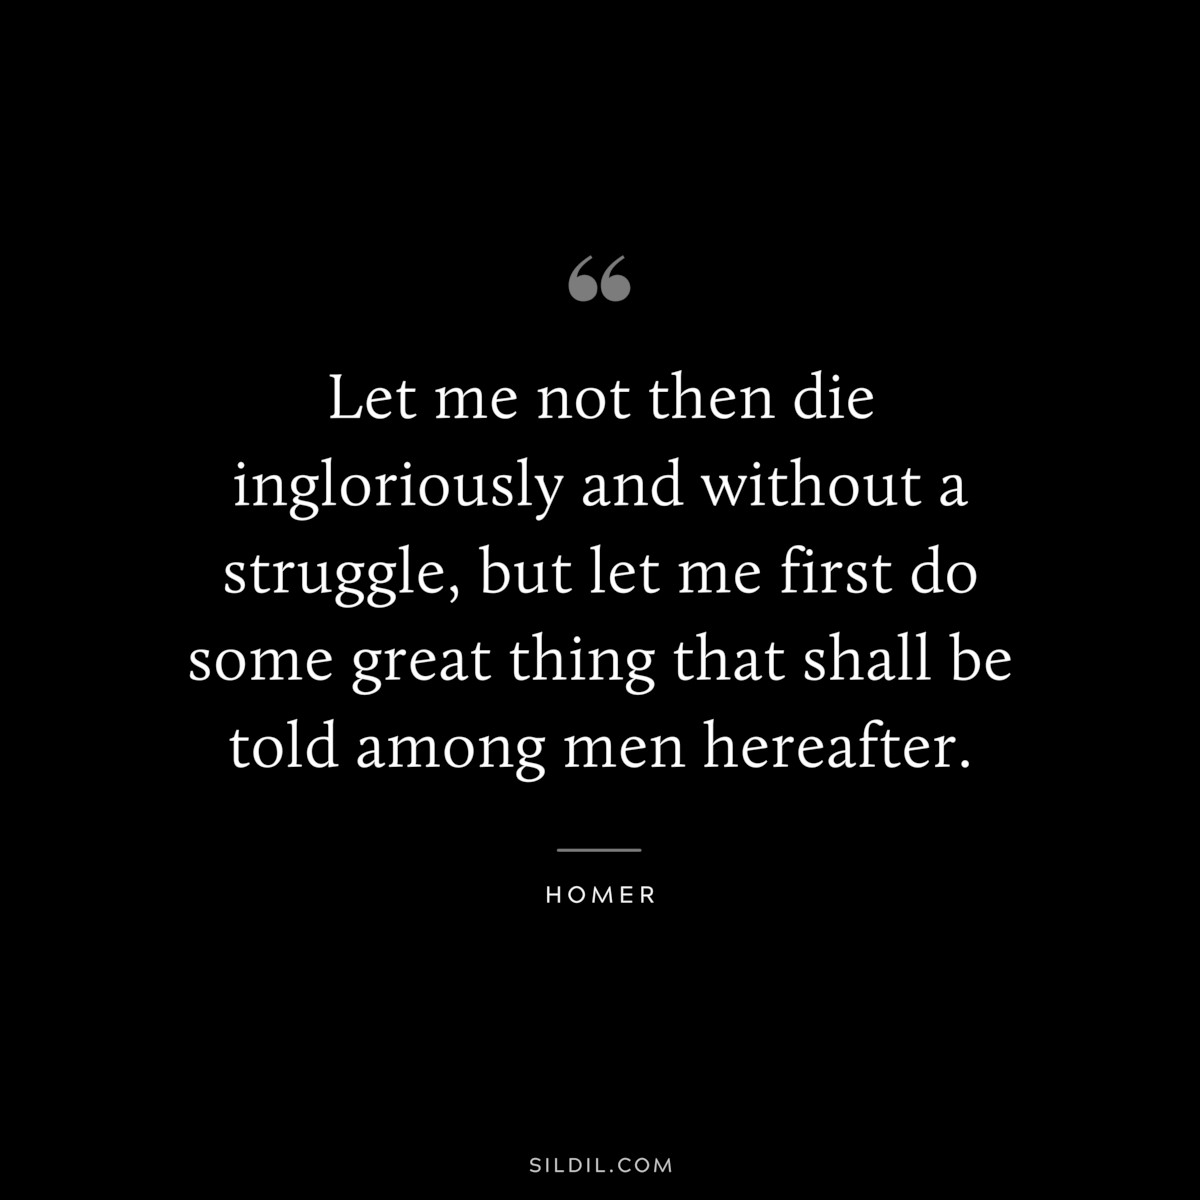 Let me not then die ingloriously and without a struggle, but let me first do some great thing that shall be told among men hereafter. ― Homer